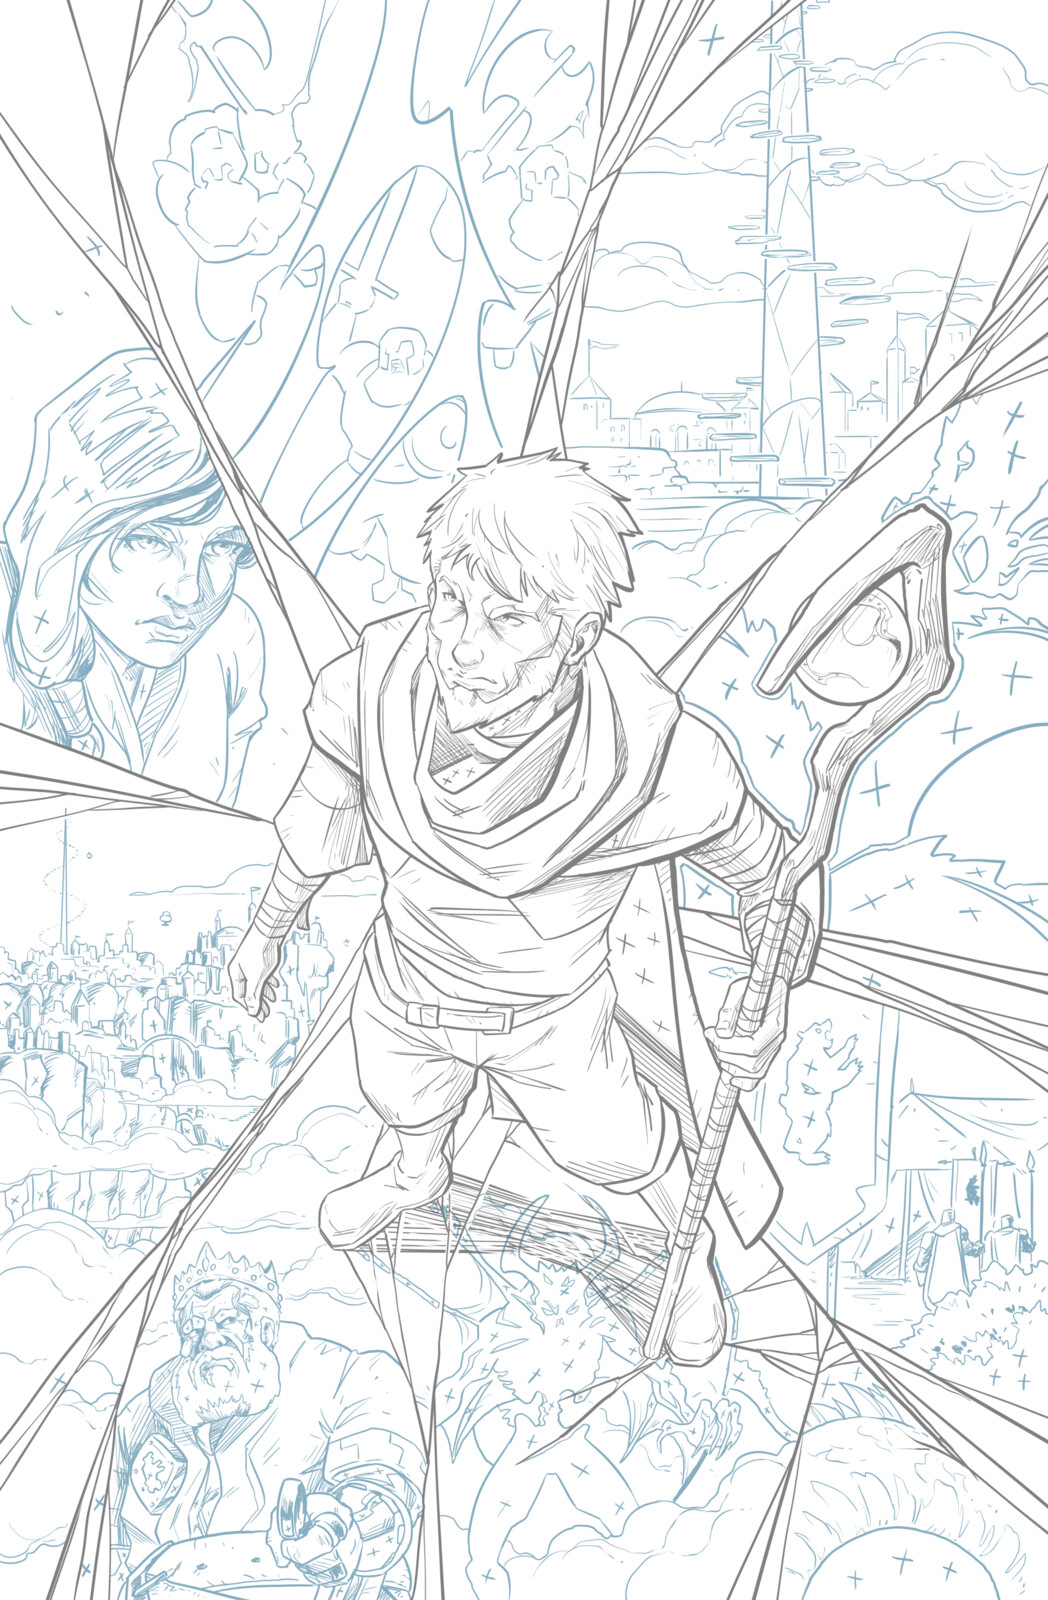 Legends of the Realm: The Floated Dream - Comic Cover Pencils